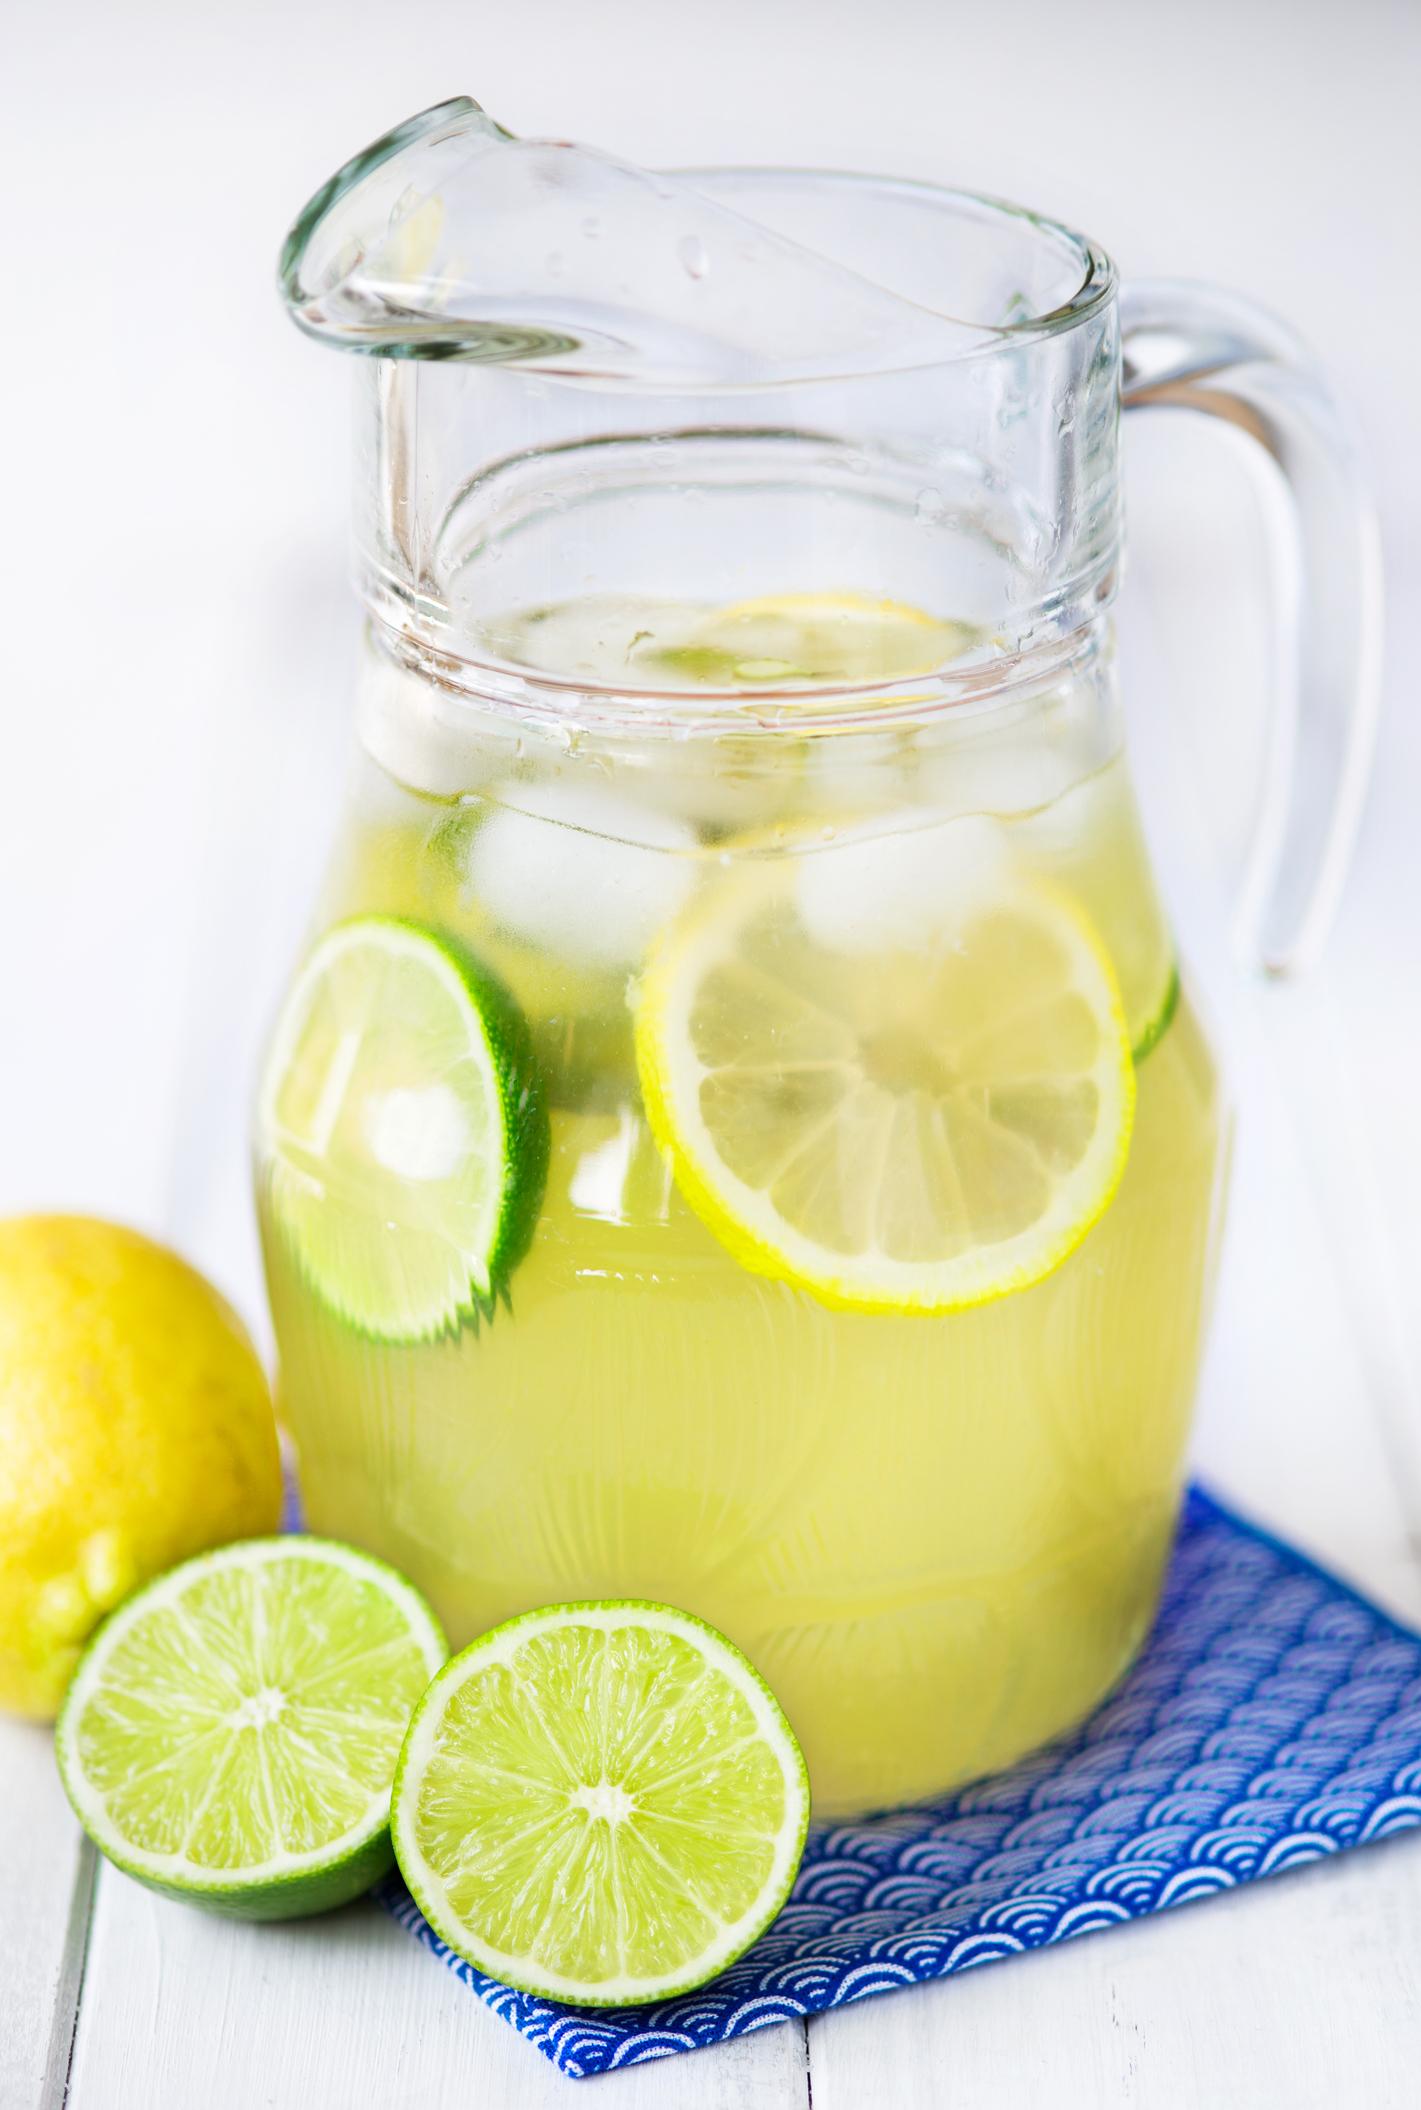 Pitcher with lemonade